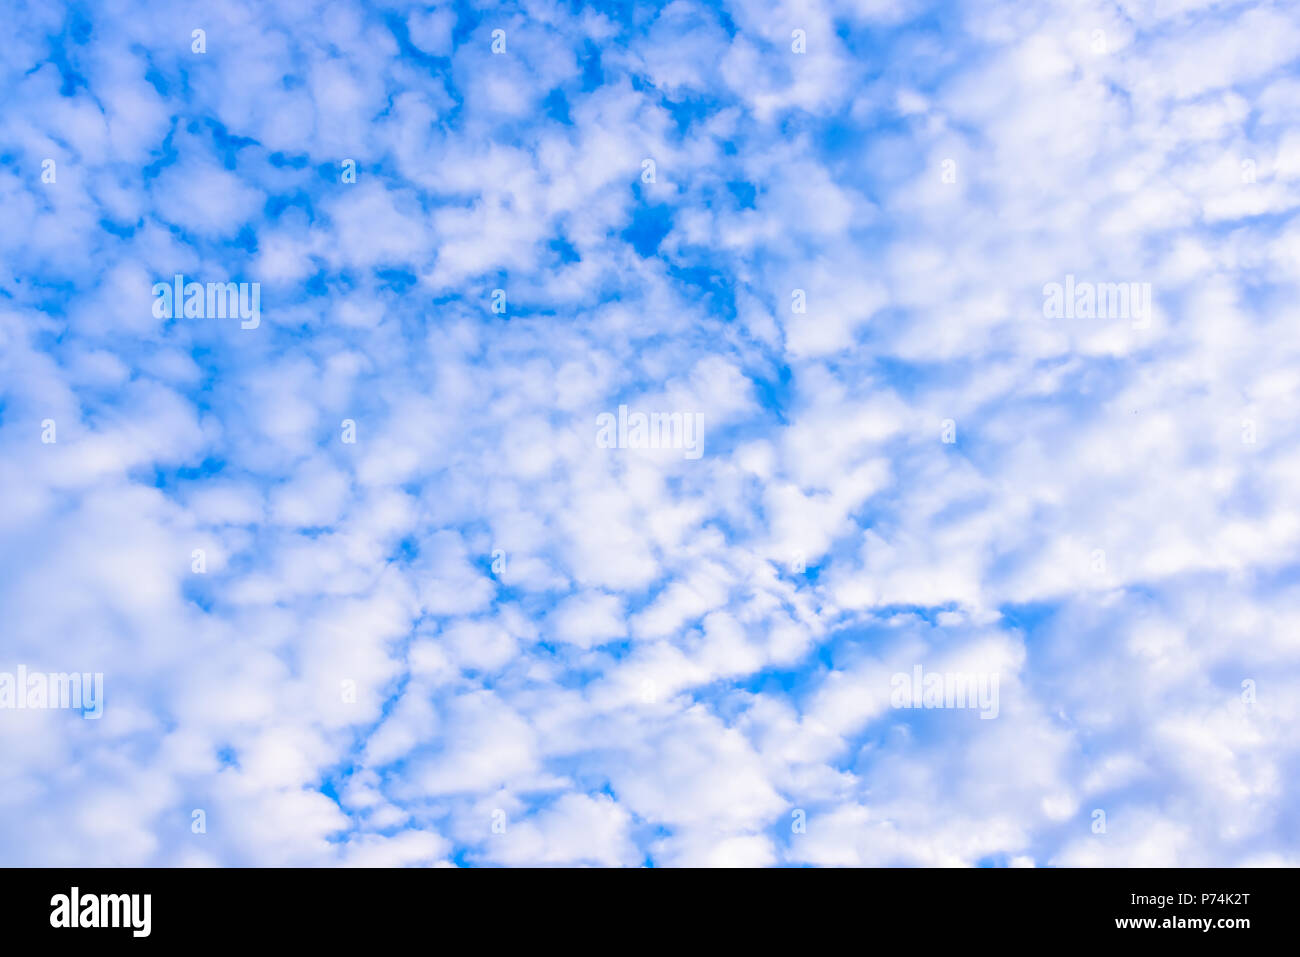 Beautiful Clouds With Blue Sky Background Nature Weather Cloud Blue Sky White Fluffy Clouds In The Blue Sky Copy Space For Editing Stock Photo Alamy